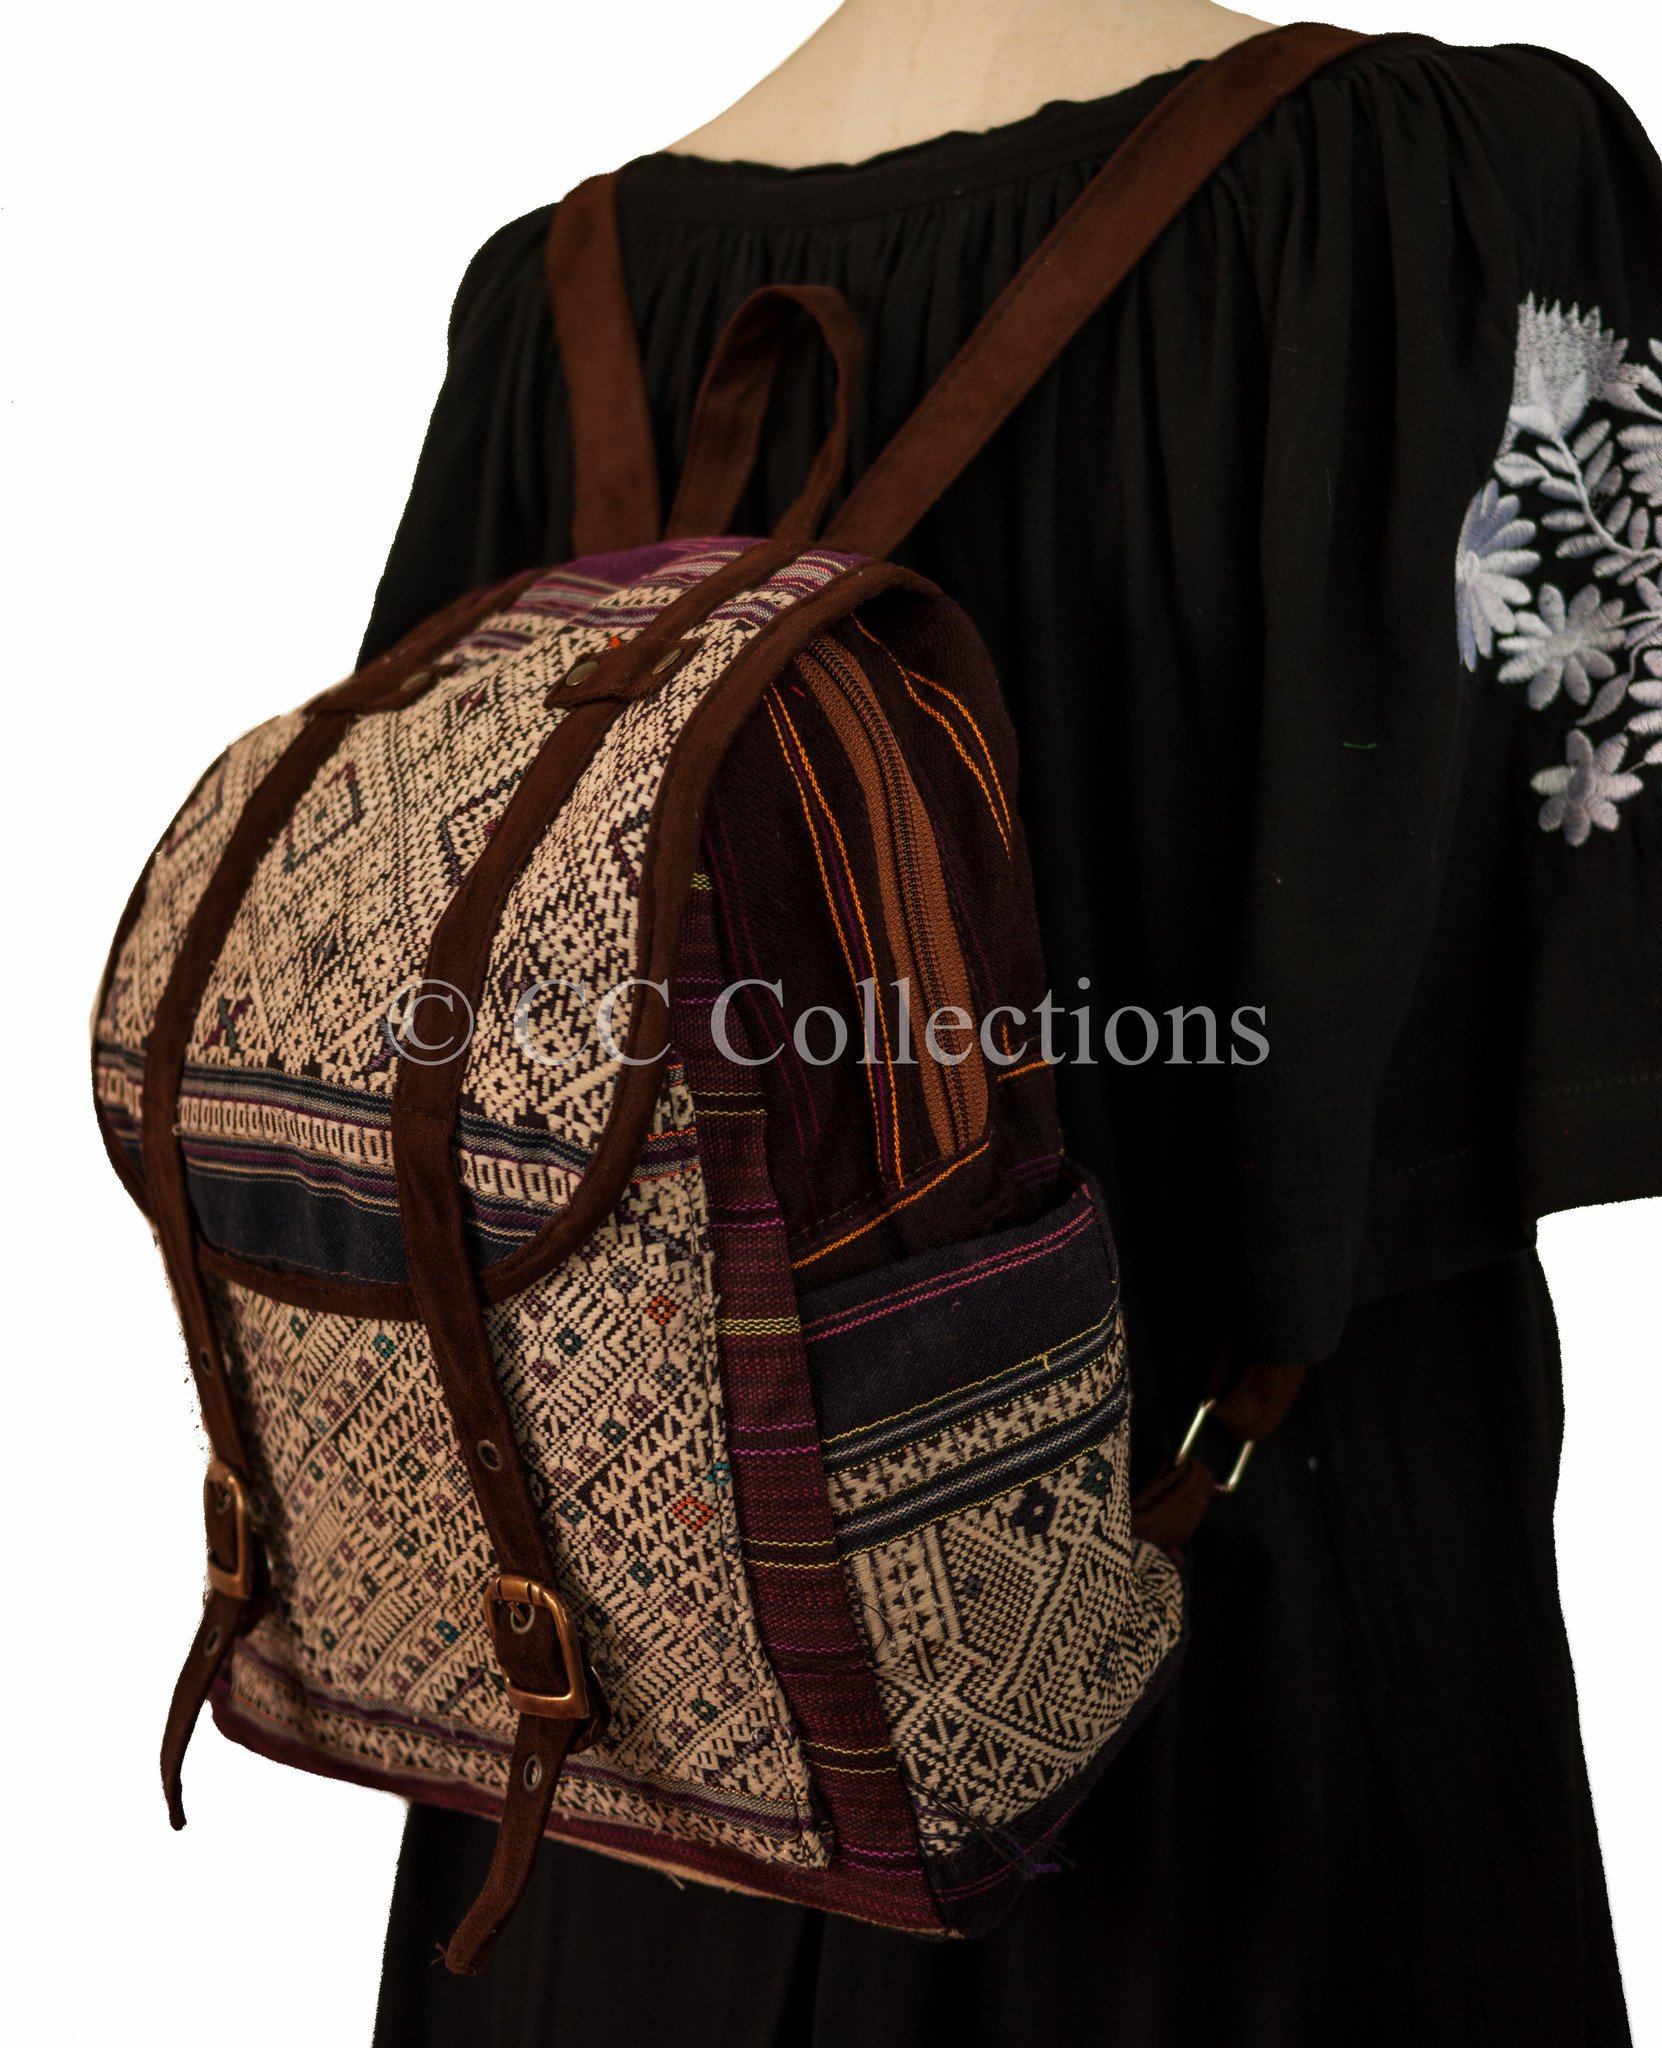 Backpack Hill Tribe Purple Bag - CCCollections